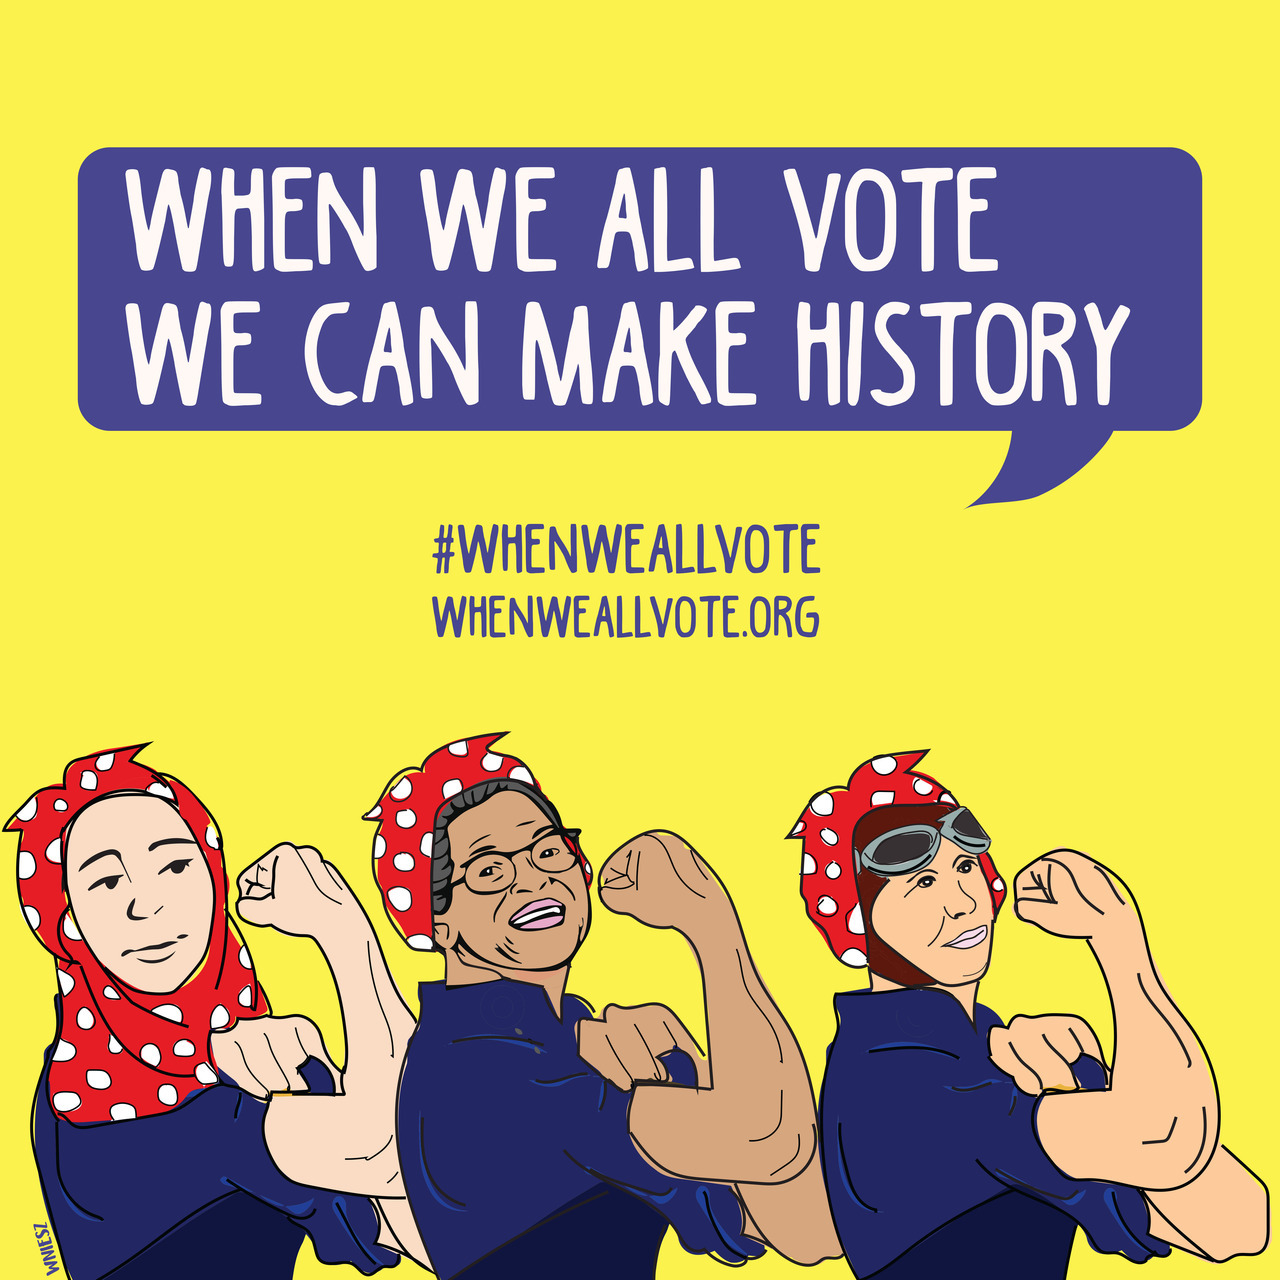 whenweallvote:
“ When we all vote, we determine the future for ourselves, our daughters, granddaughters, and generations to come!
🎨 @sketchandpaws on Twitter
”